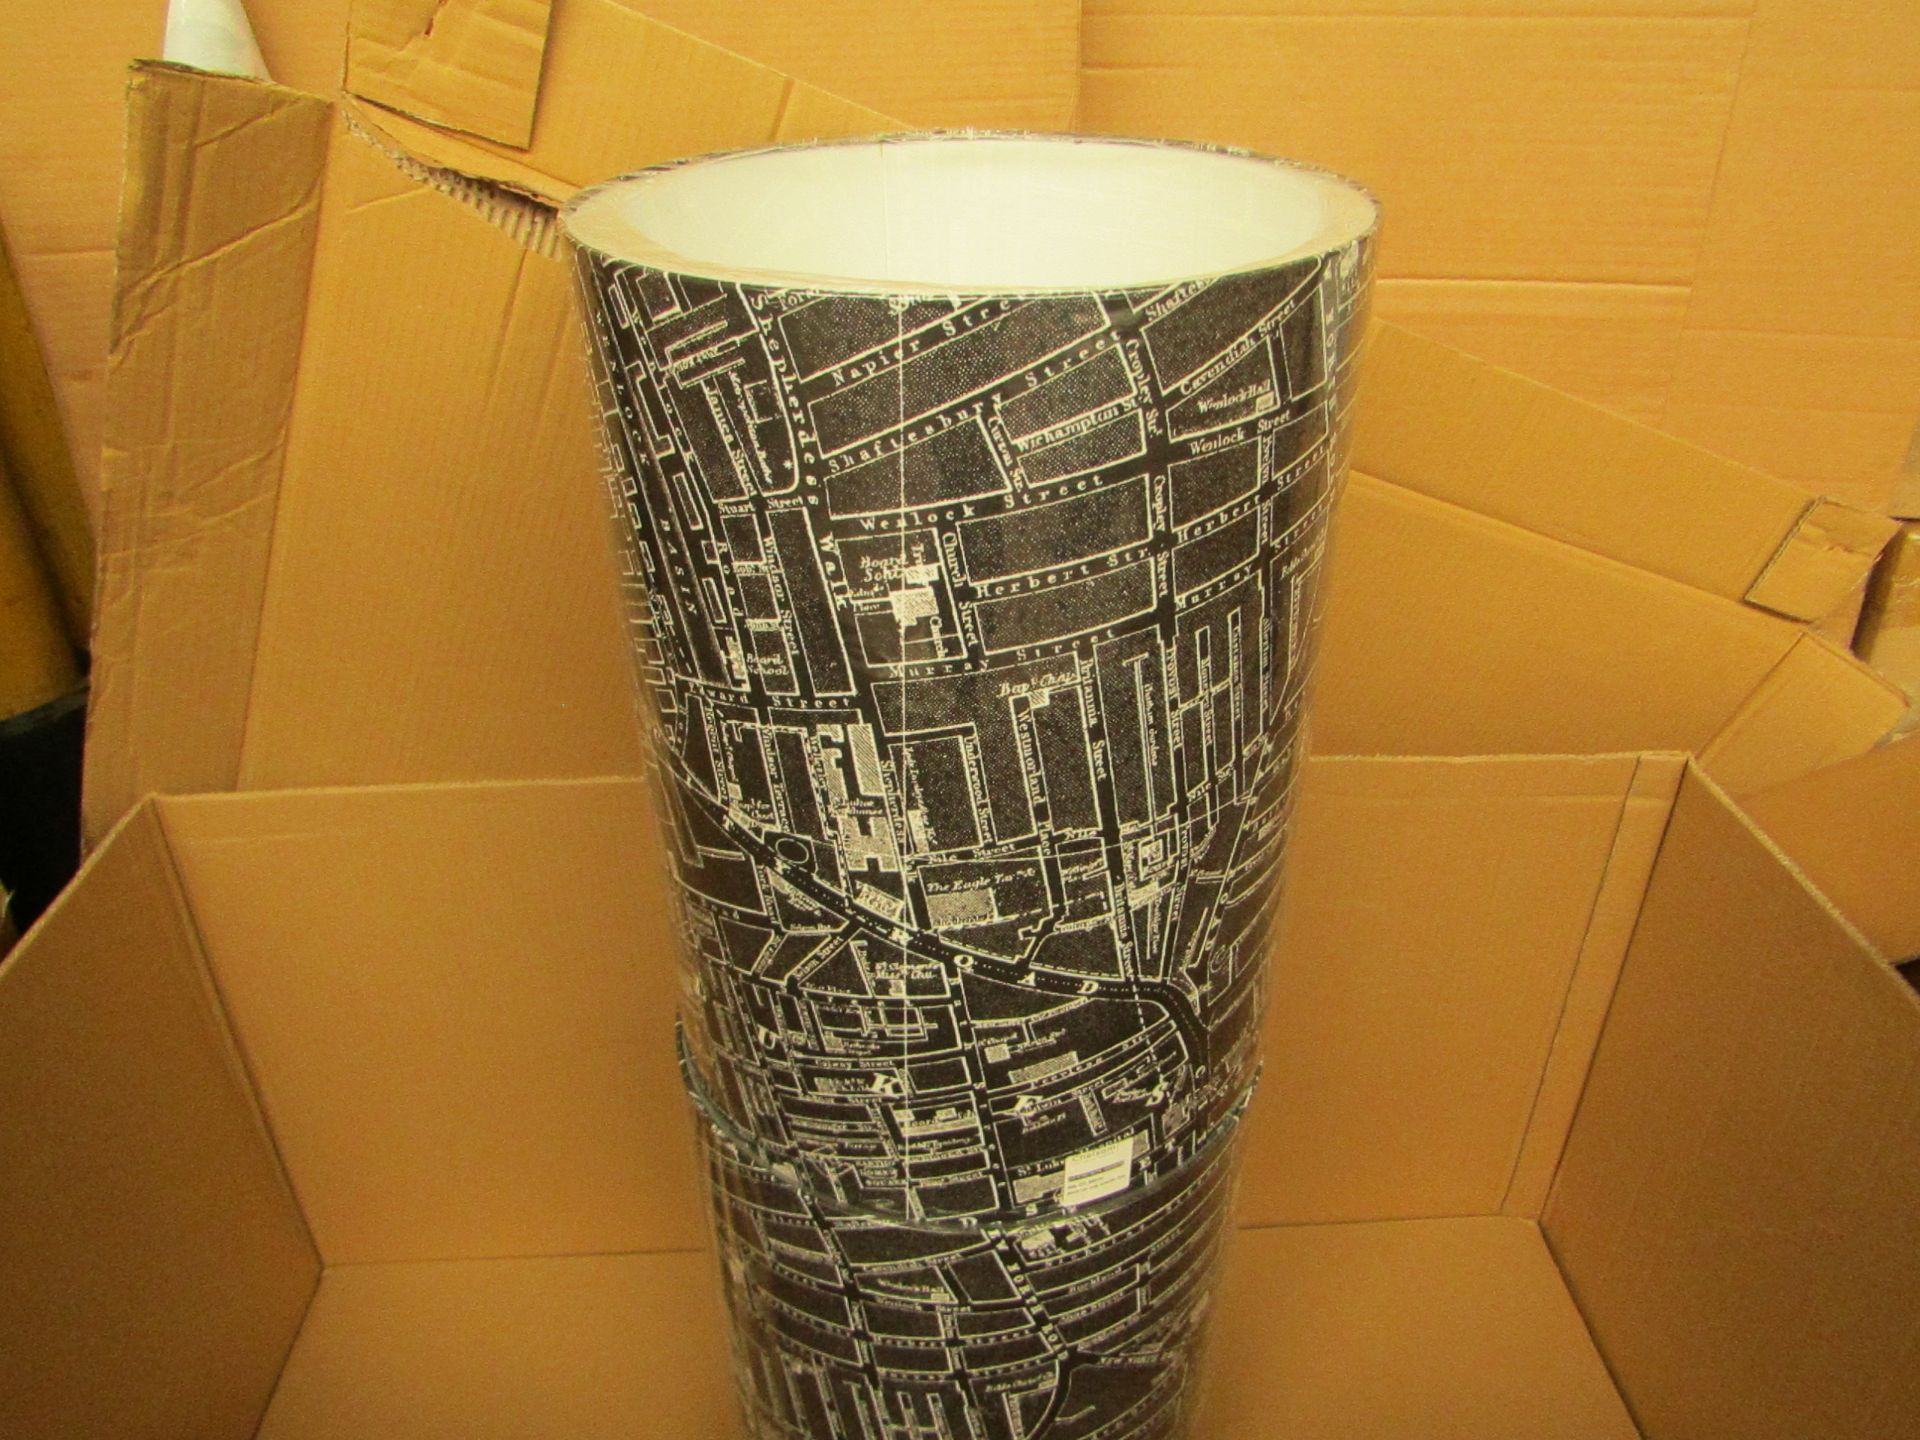 | 2X | CHELSOM LIGHTING LARGE MAP OF LONDON LAMP SHADES | UNCHECKED & UNBOXED | RRP £- |